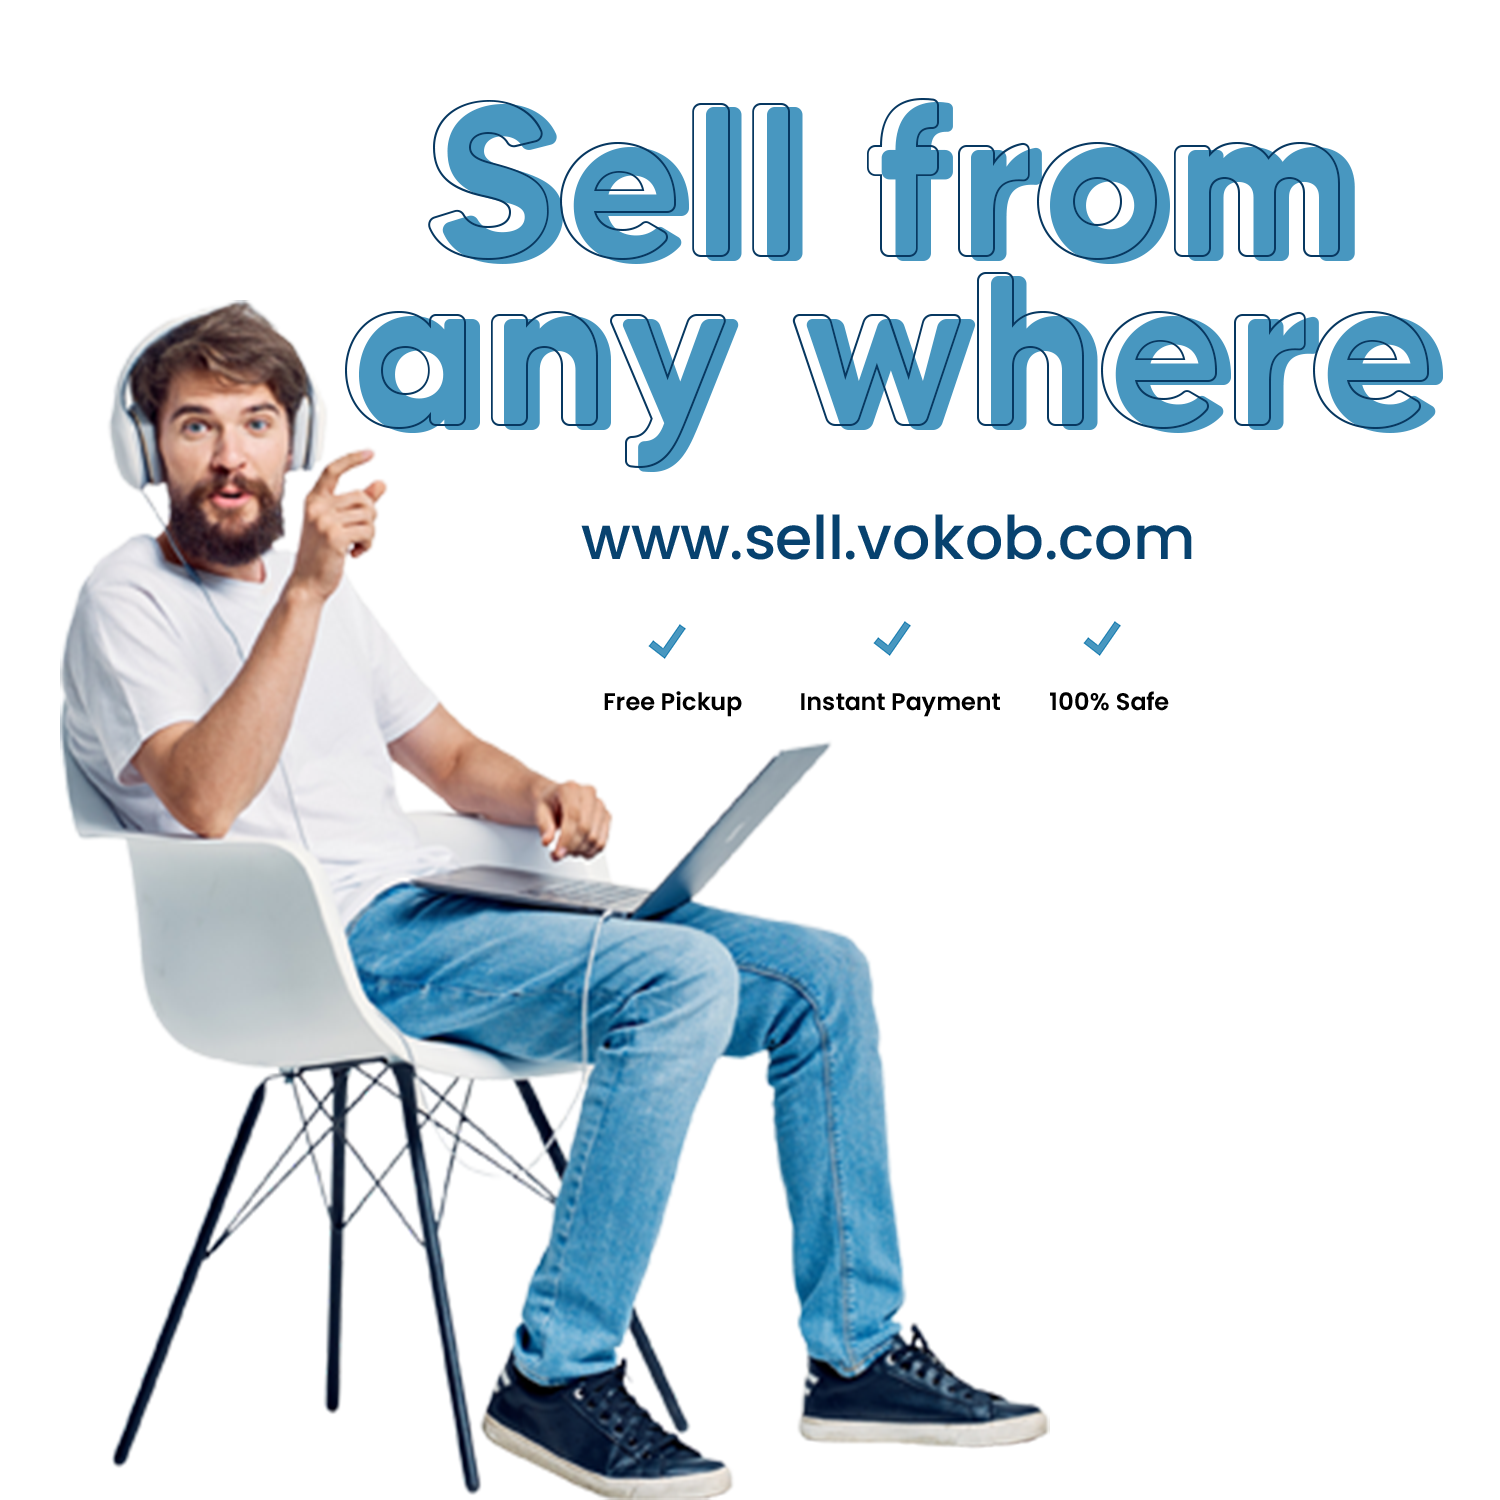 Sell electronic devices